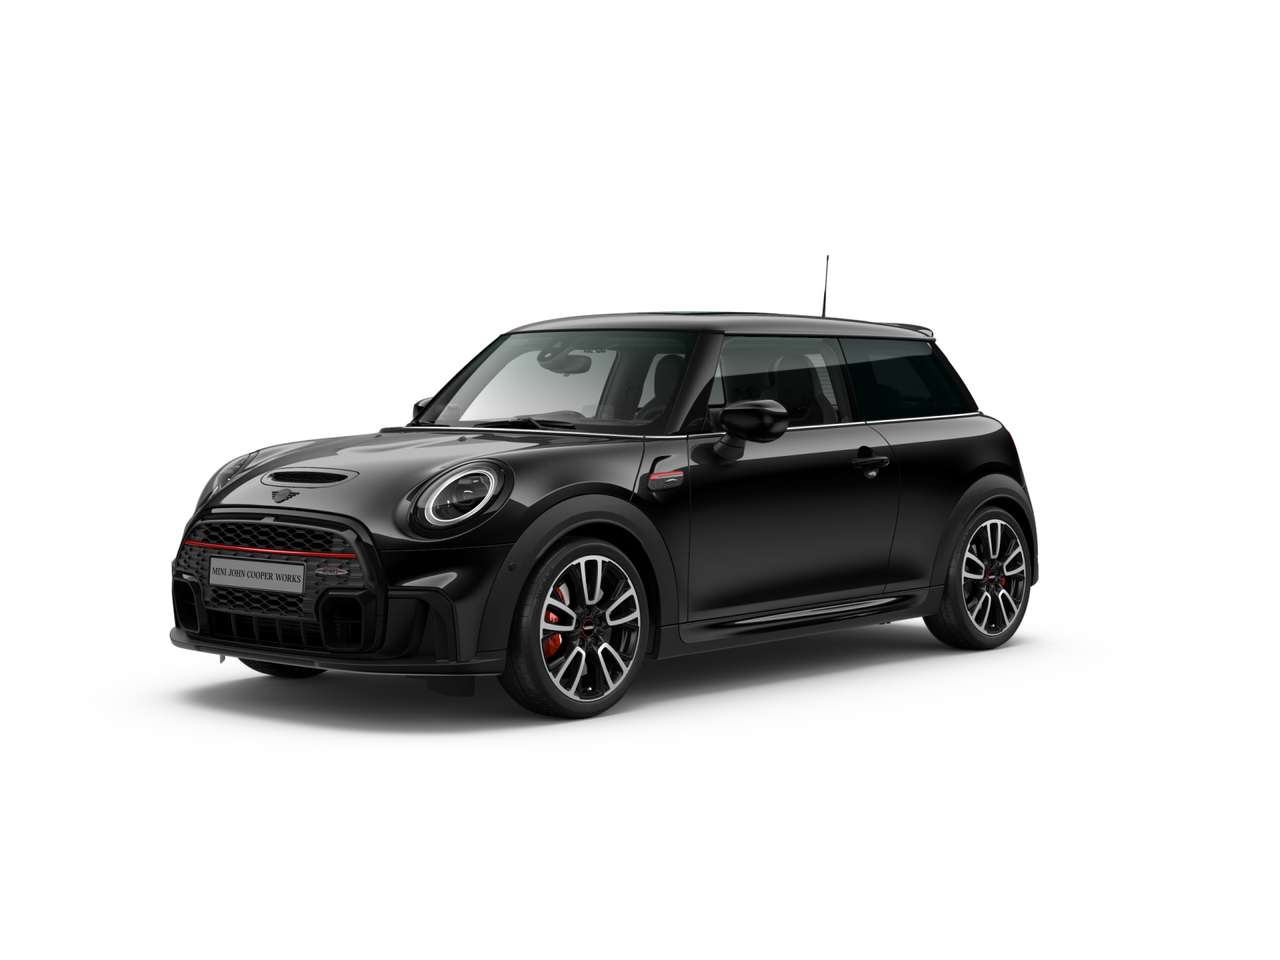 MINI John Cooper Works 1 TO 6 LIMITED EDITION 1 OF 999